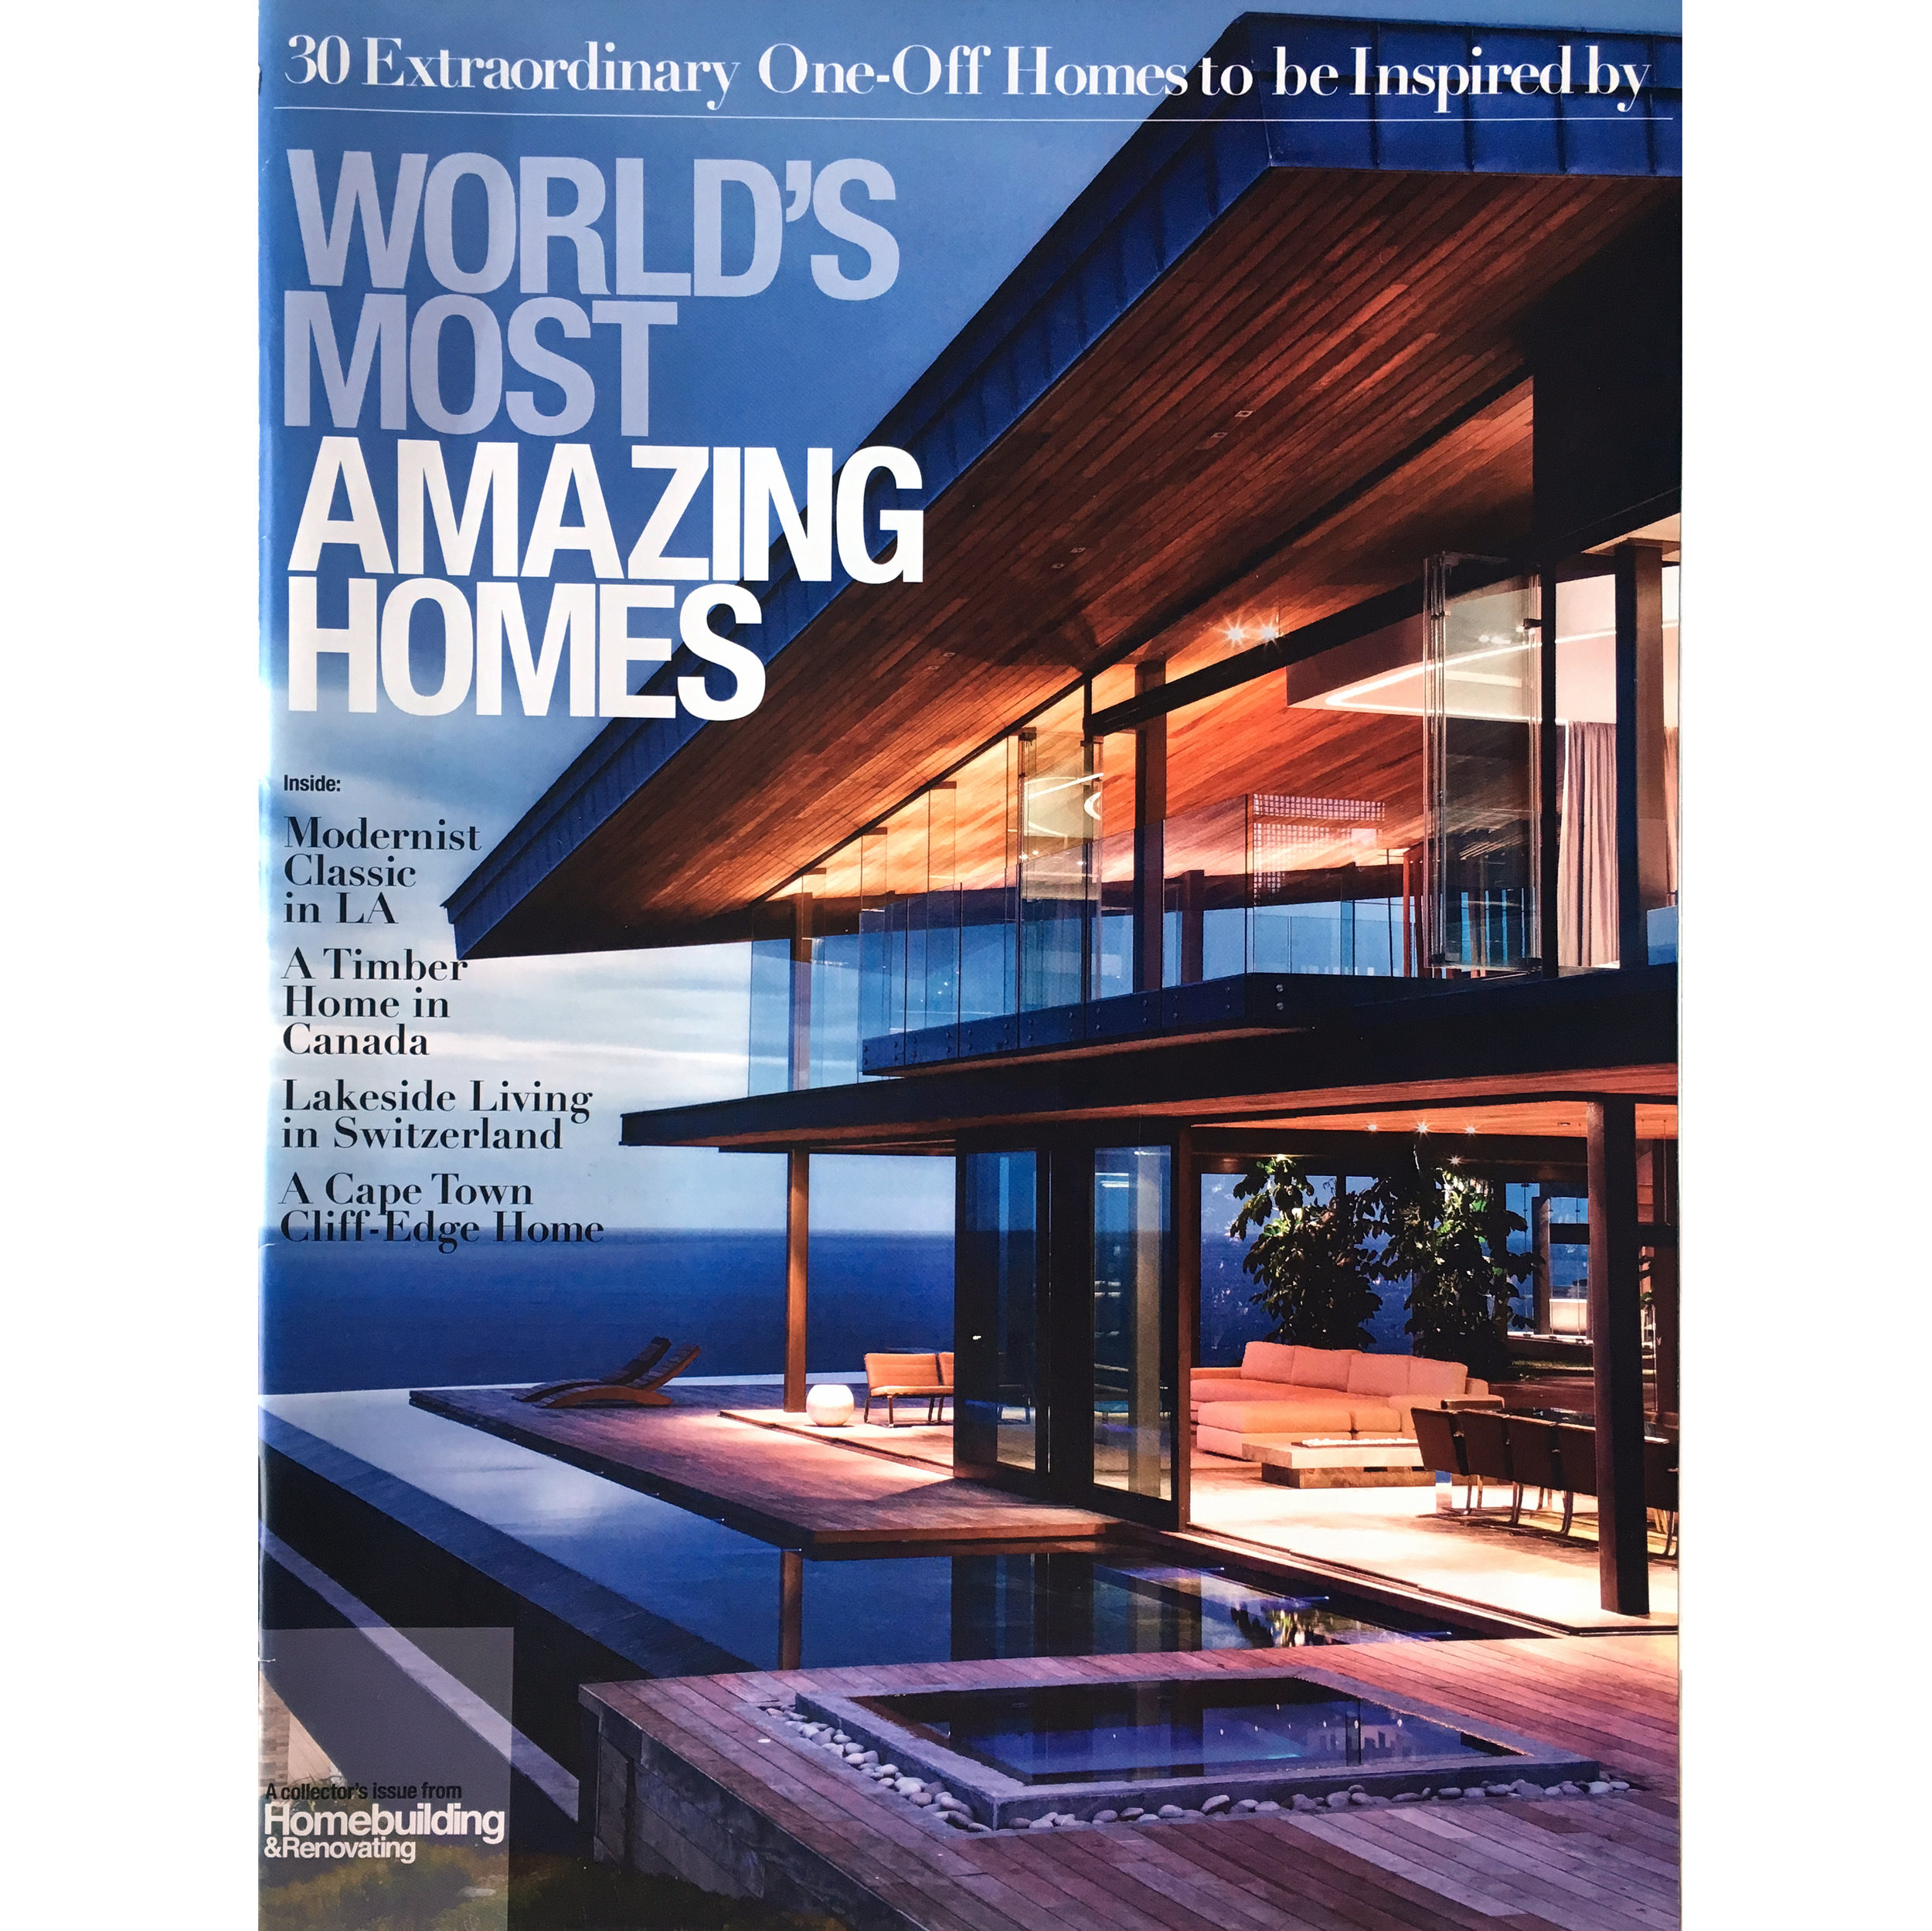 The World's most amazing homes. 2014